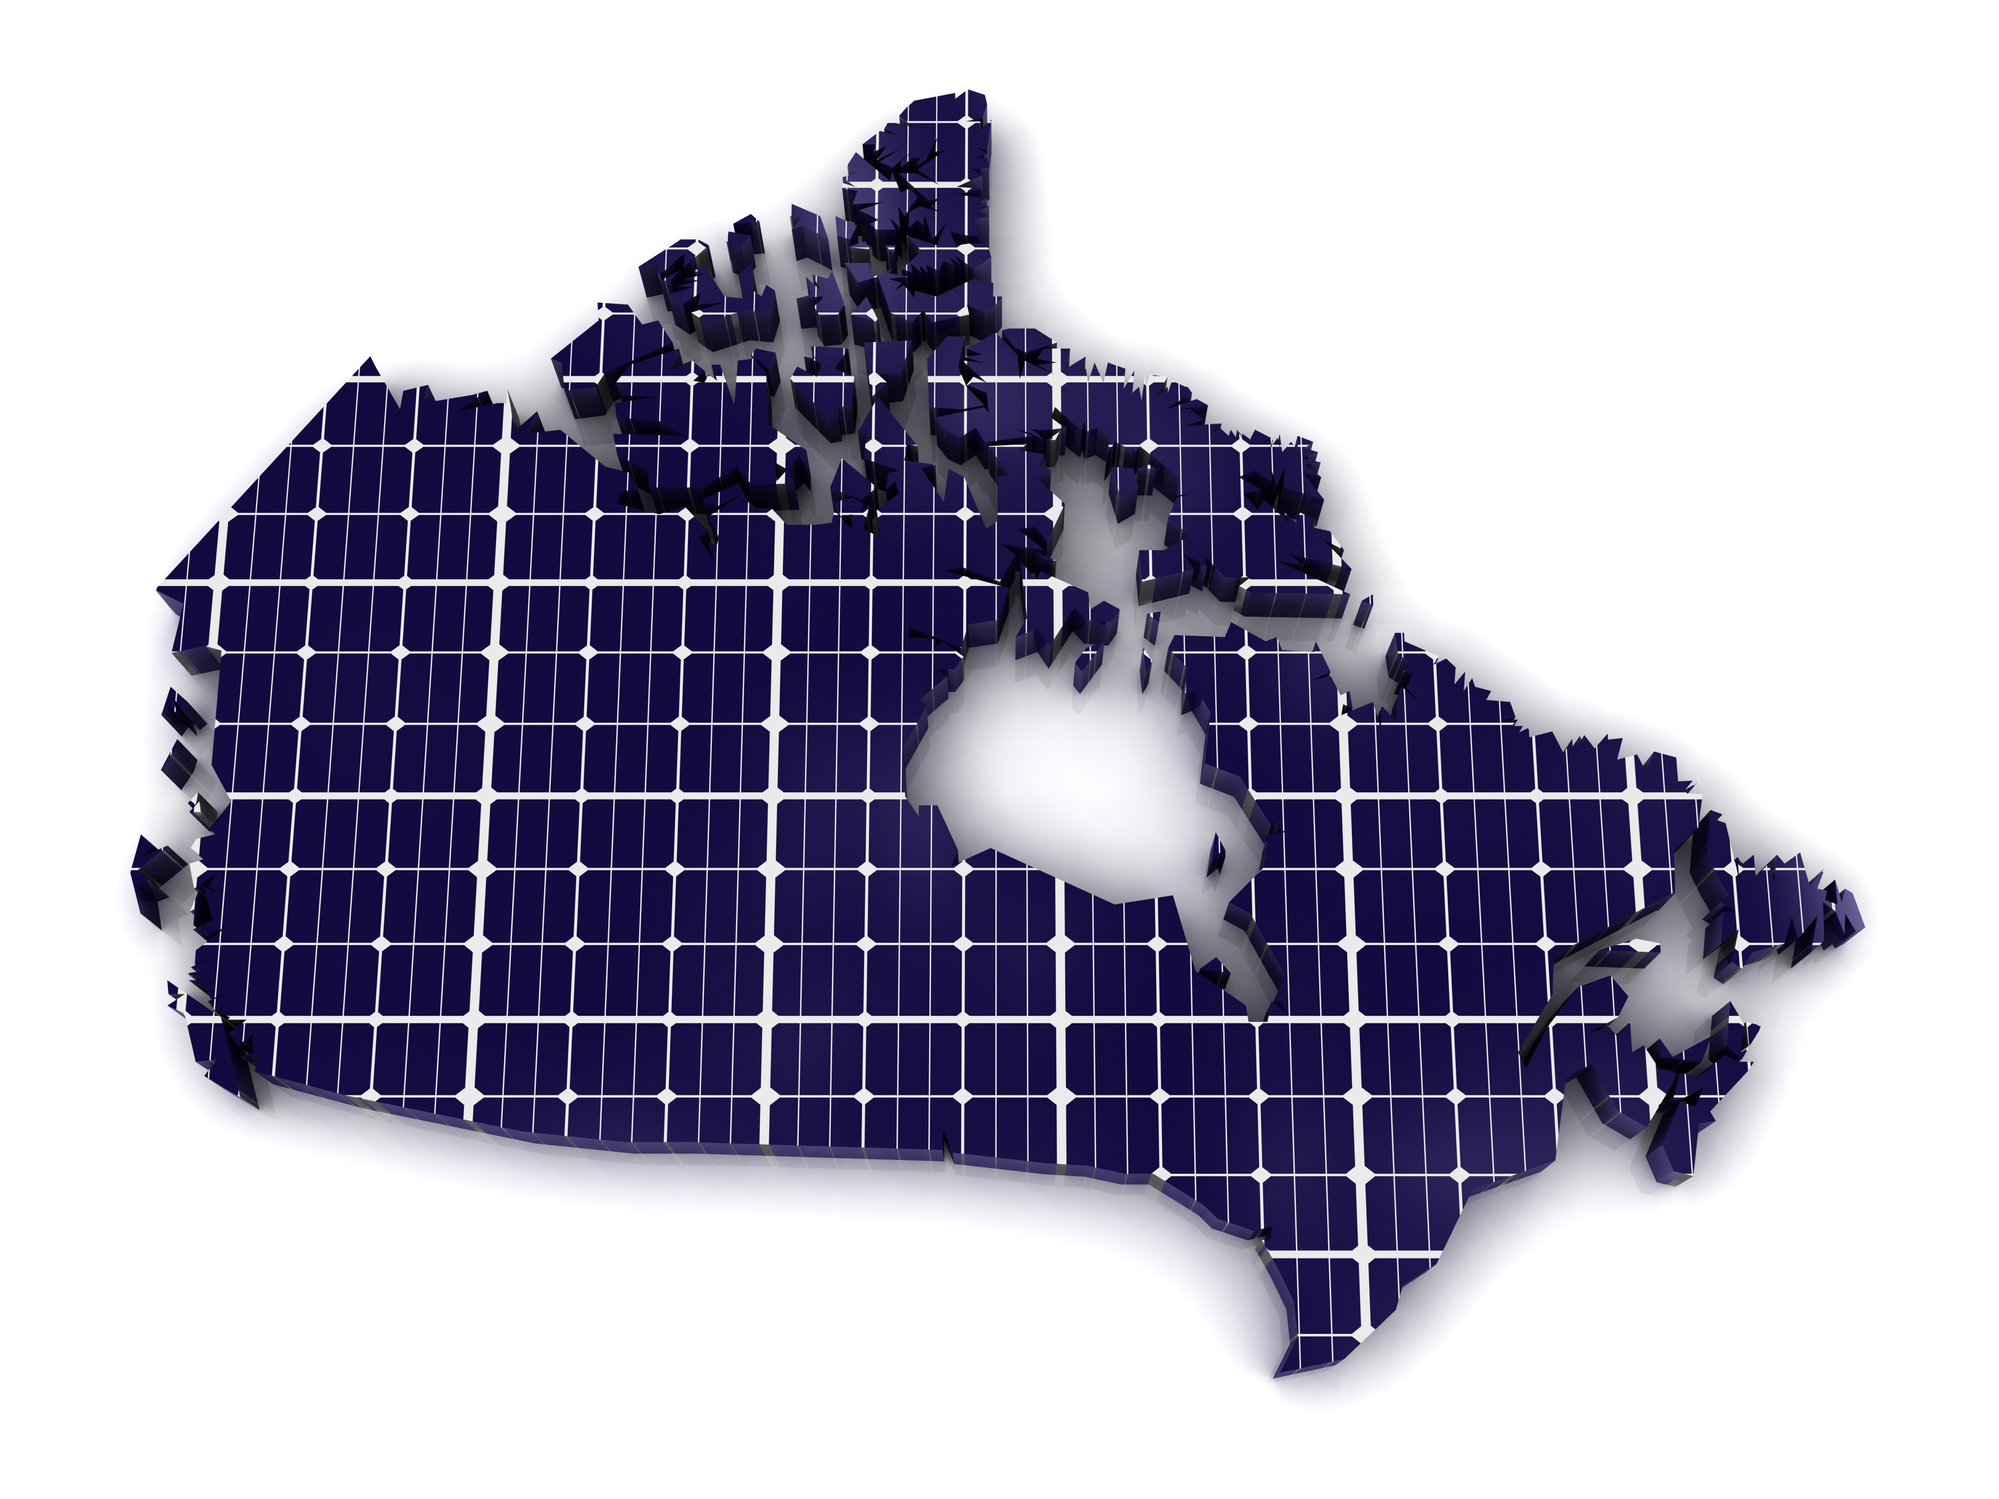  A geographical outline of Canada represented as a large solar PV panel.